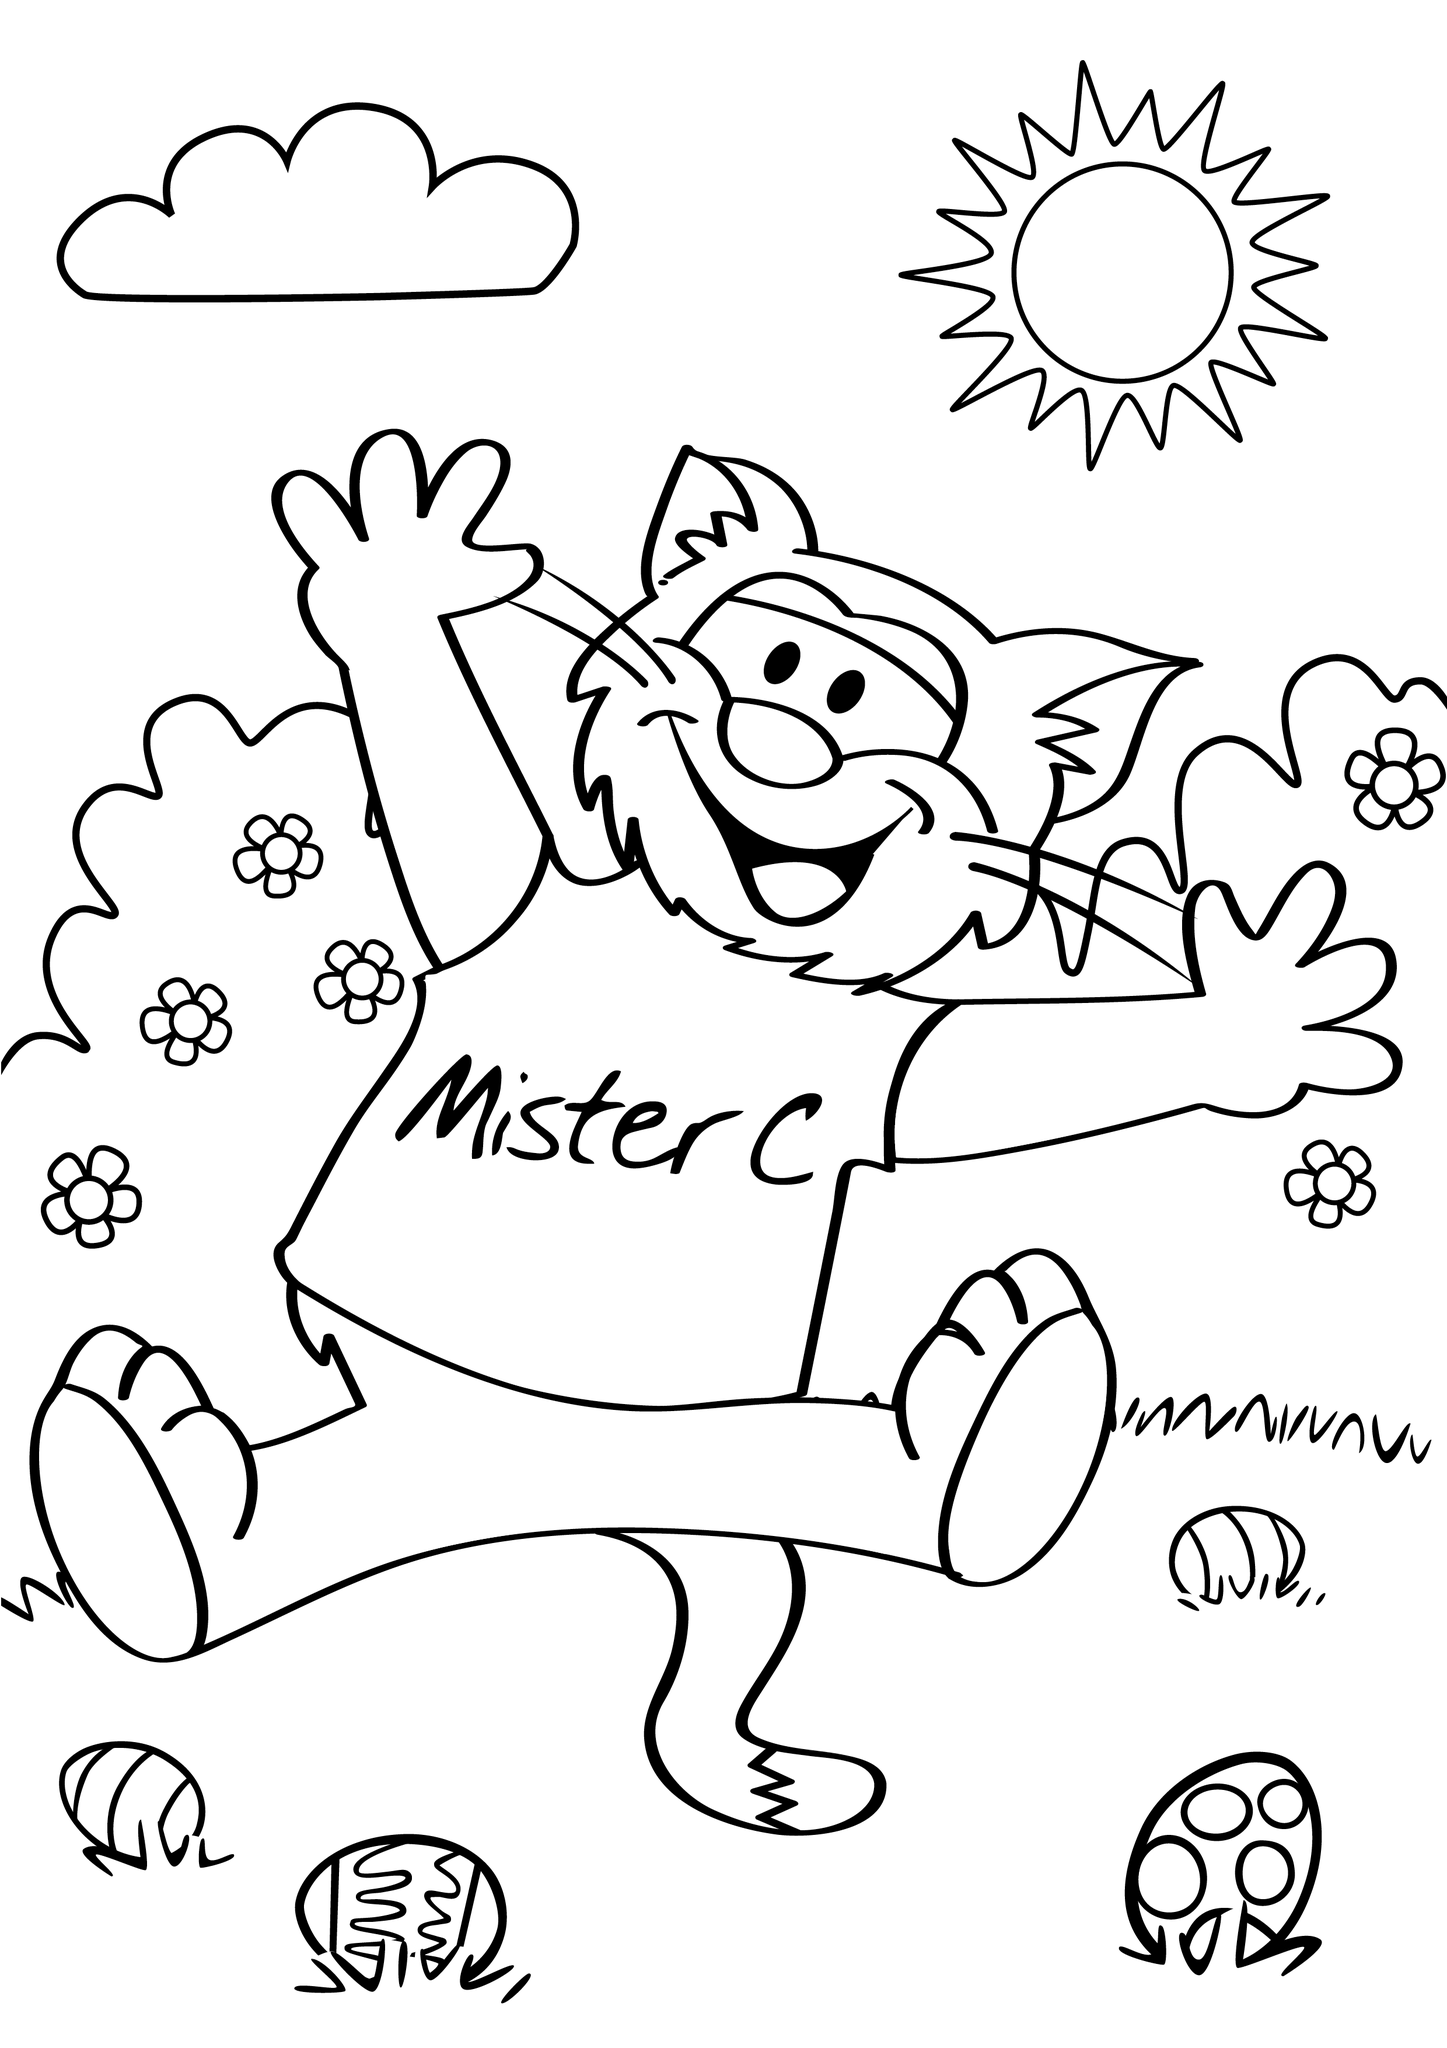 Easter Mister C colouring competition